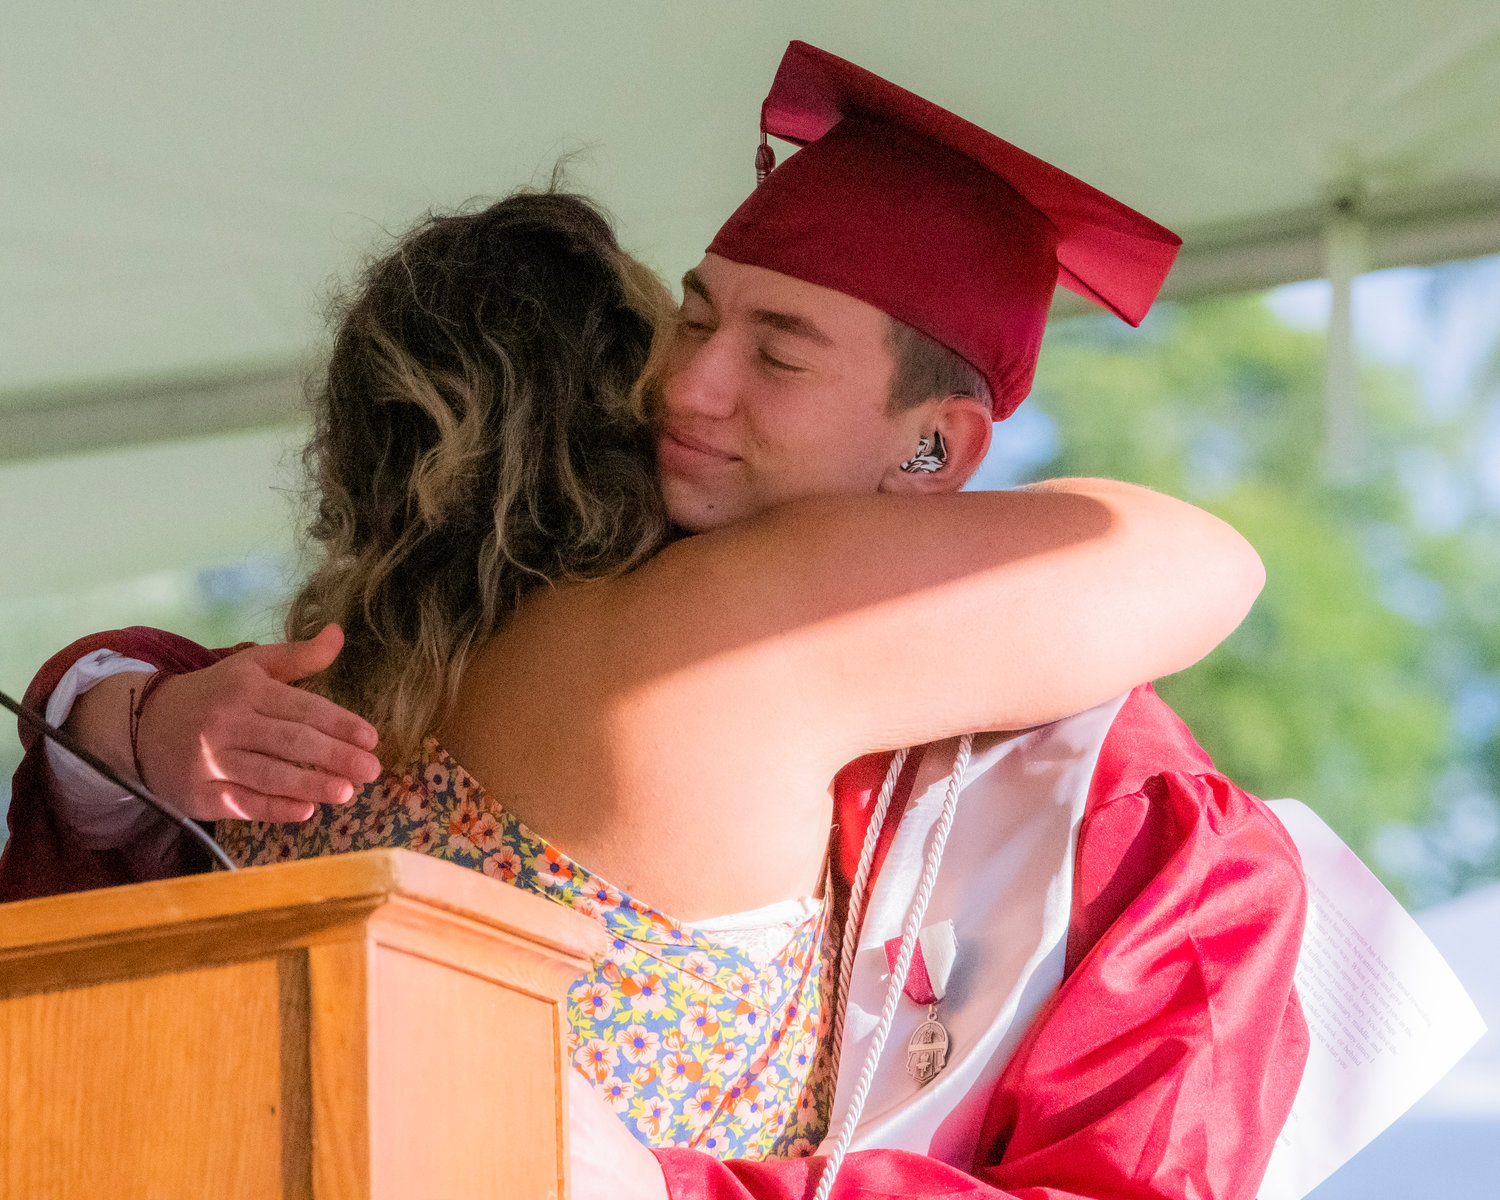 Joshua Eberly receives an embrace as he is honored with an award at Bearcat Stadium Saturday in Chehalis.